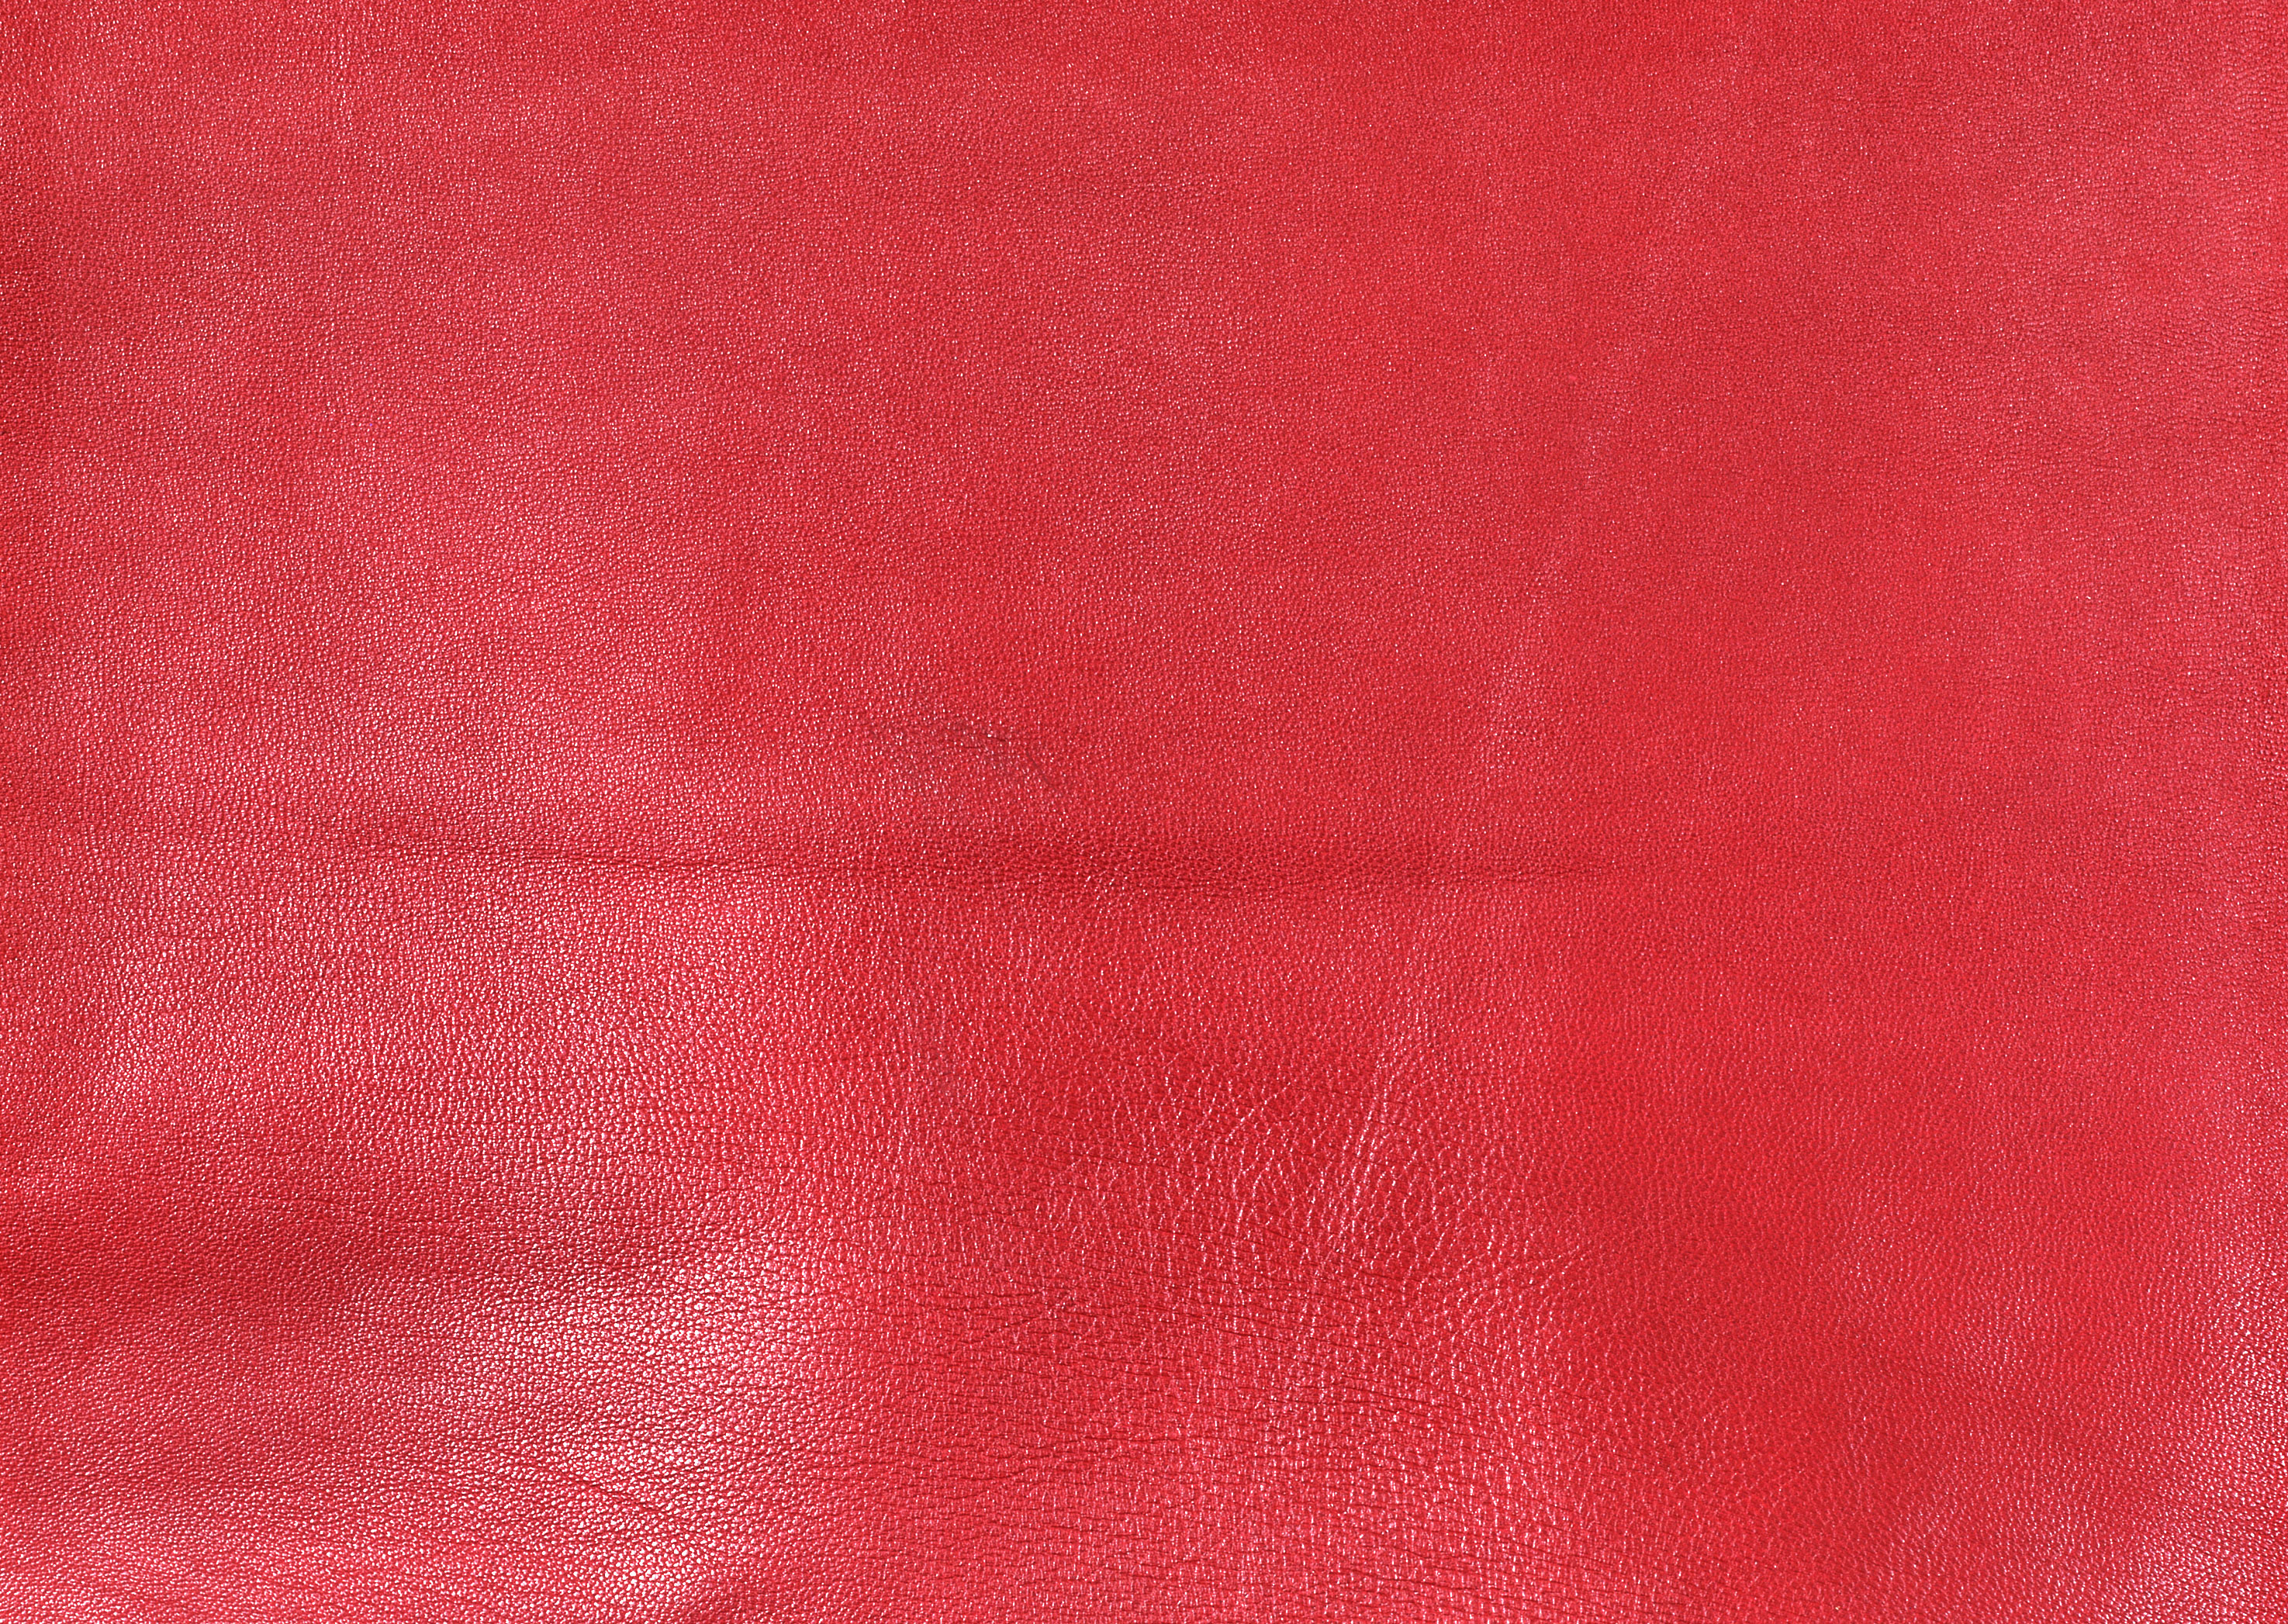 red leather texture background image free download